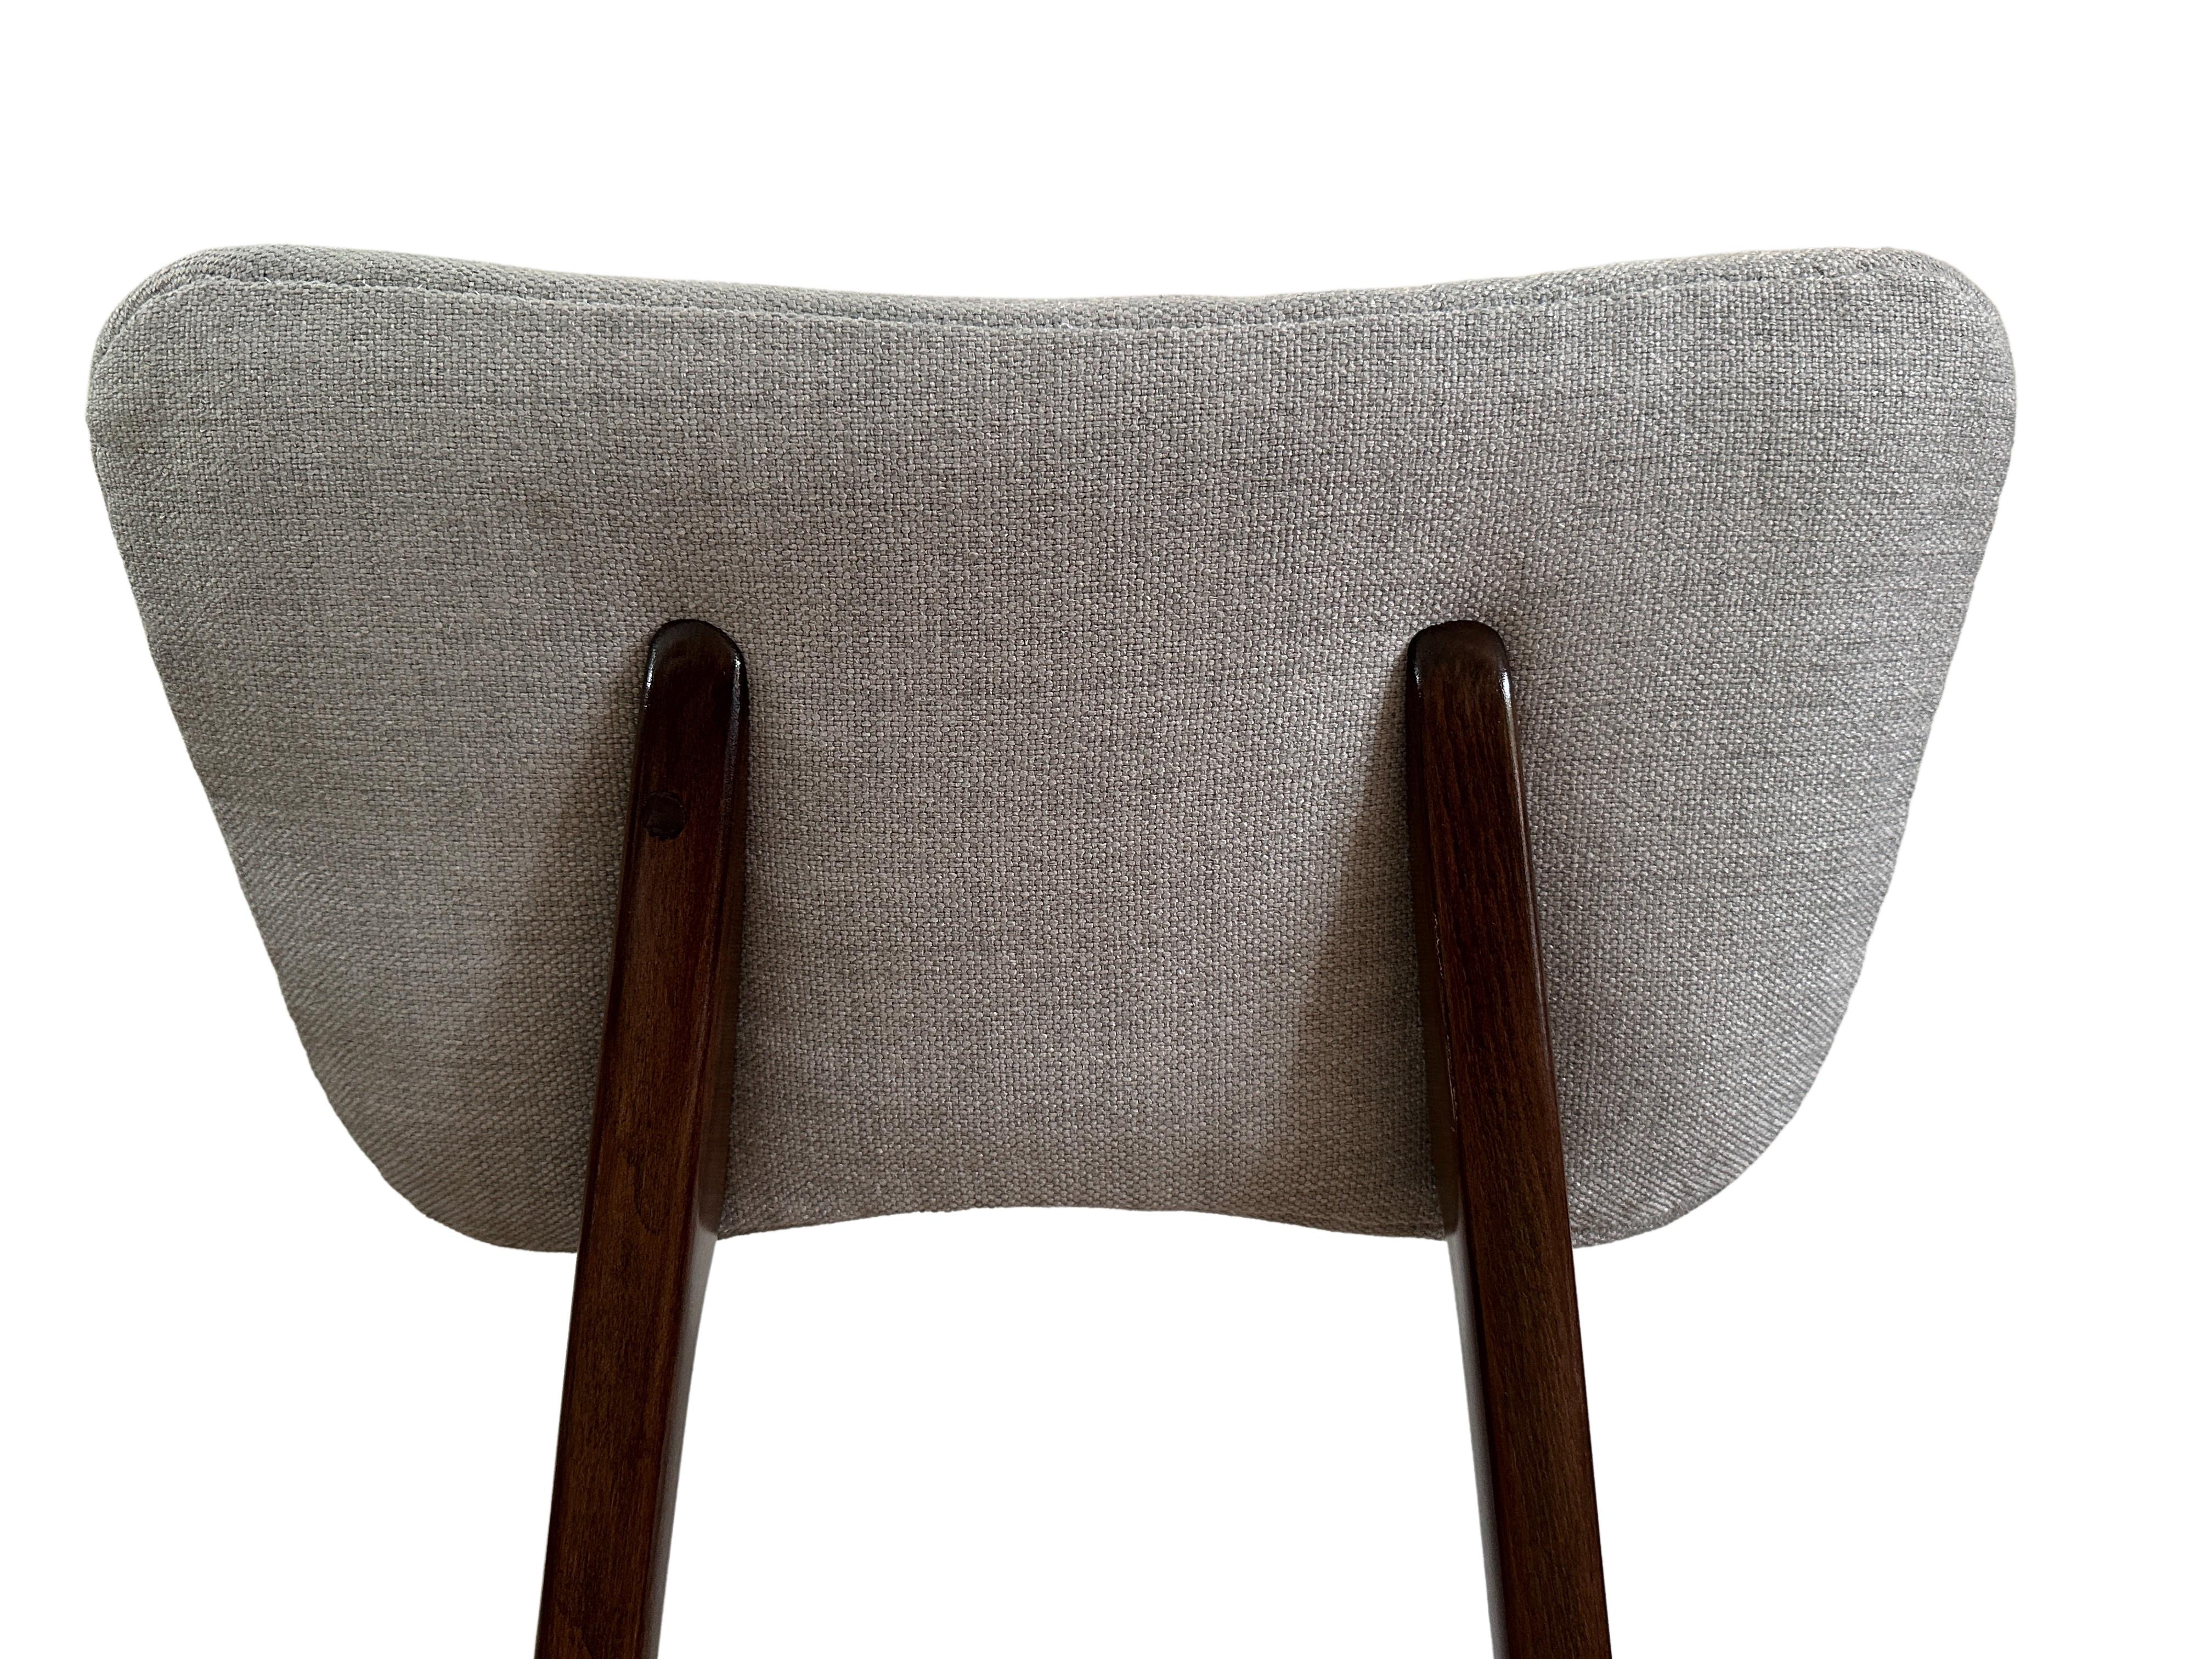 Hand-Crafted Mid Century Wooden Dining Chair in Grey Upholstery, Poland, 1960s For Sale